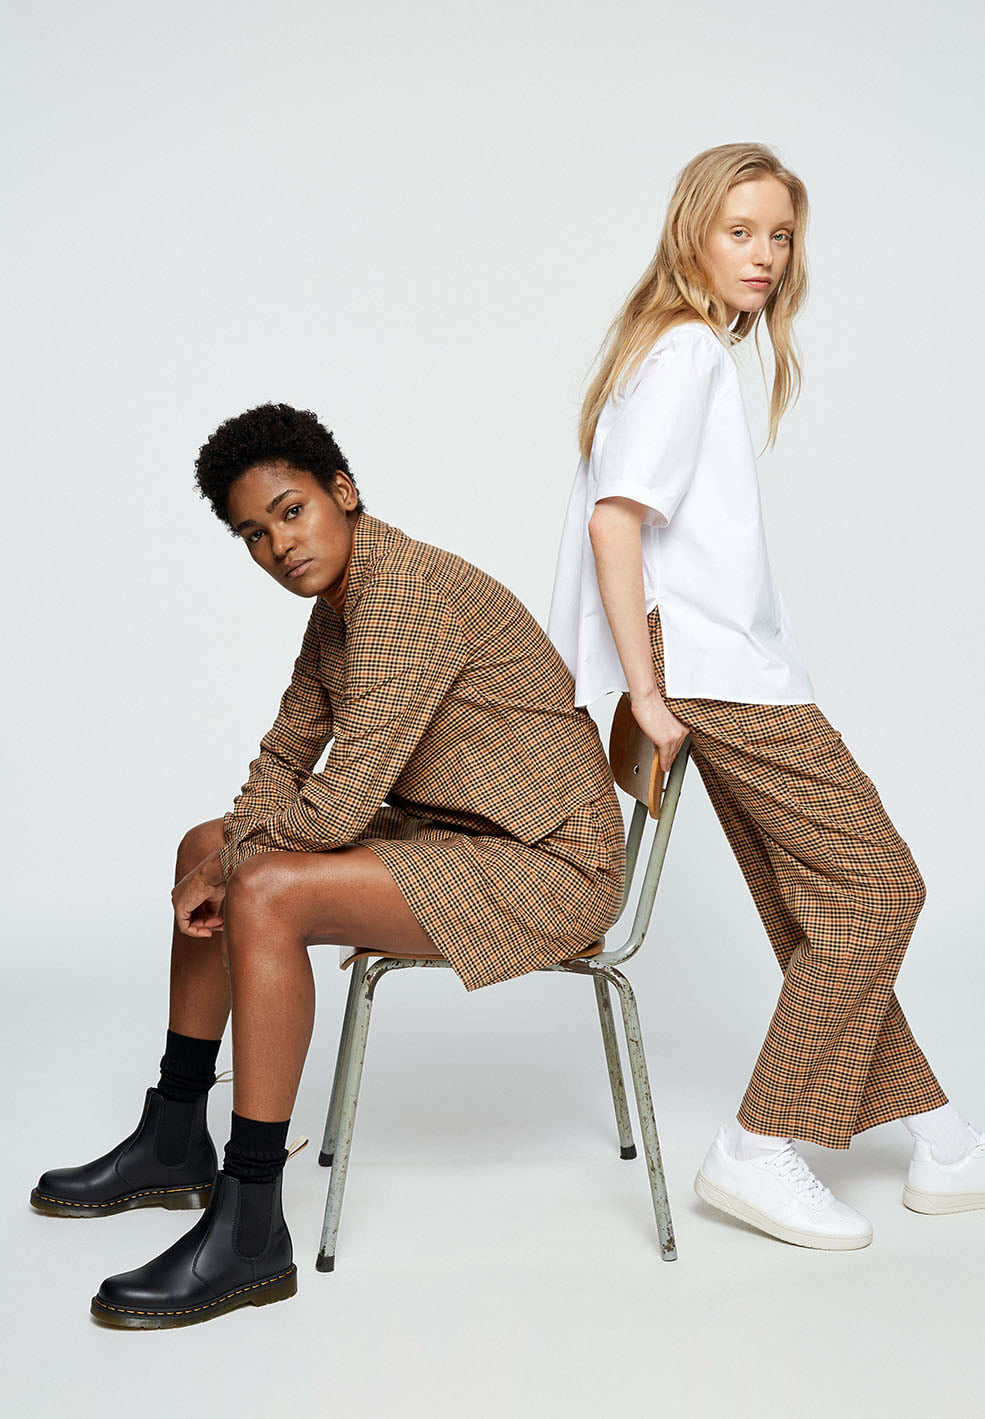 Two models wearing gold printed shorts, long sleeve shirt and pants and a white T-shirt from sustainable brand Armedangels with black and white shoes